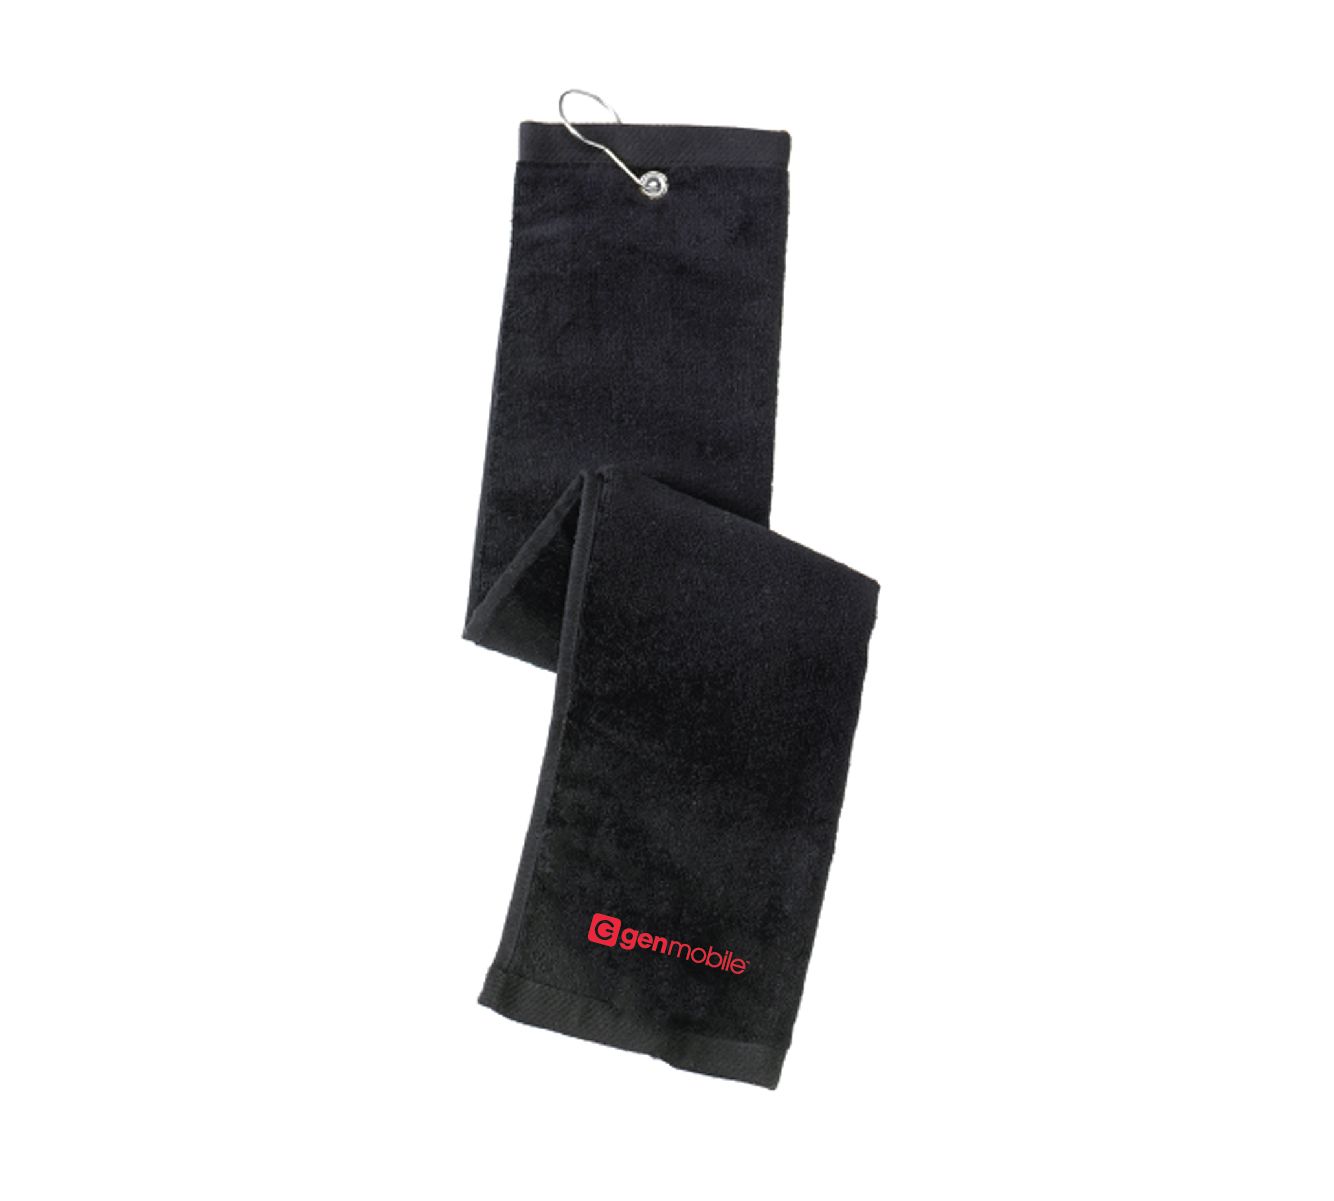 Grommeted Tri-Fold Golf Towel with Gen Mobile Logo